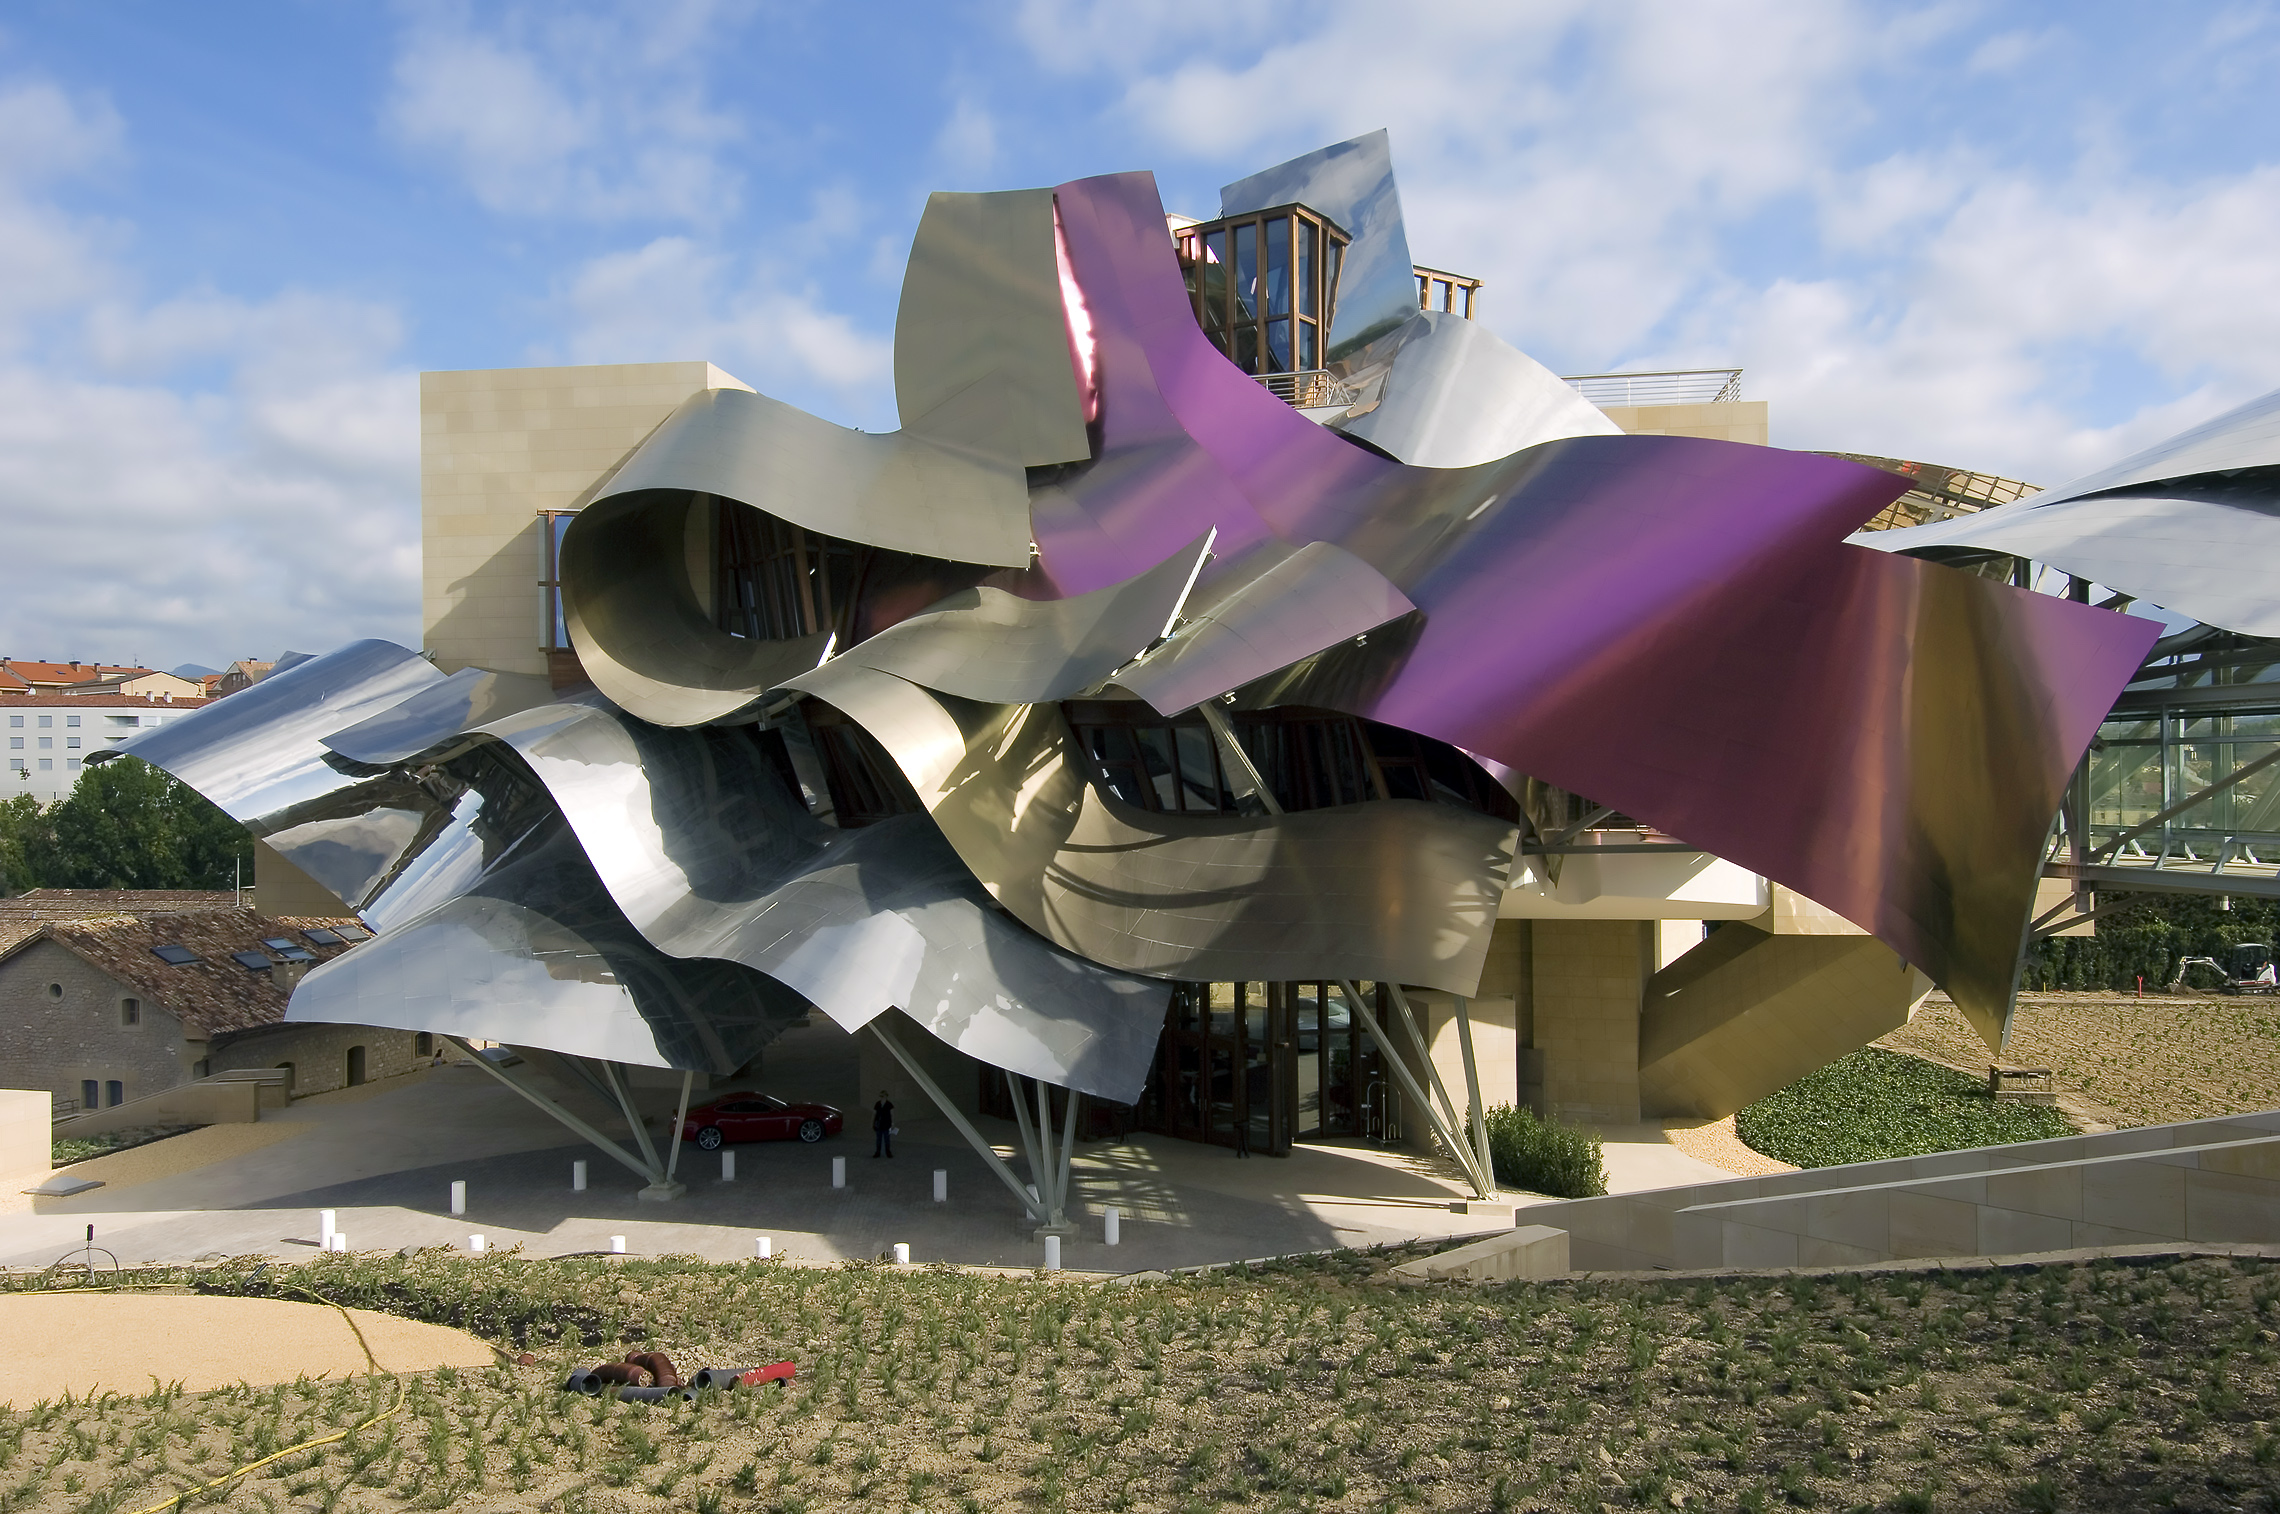 Frank Gehry Buildings, Architecture & Design Process